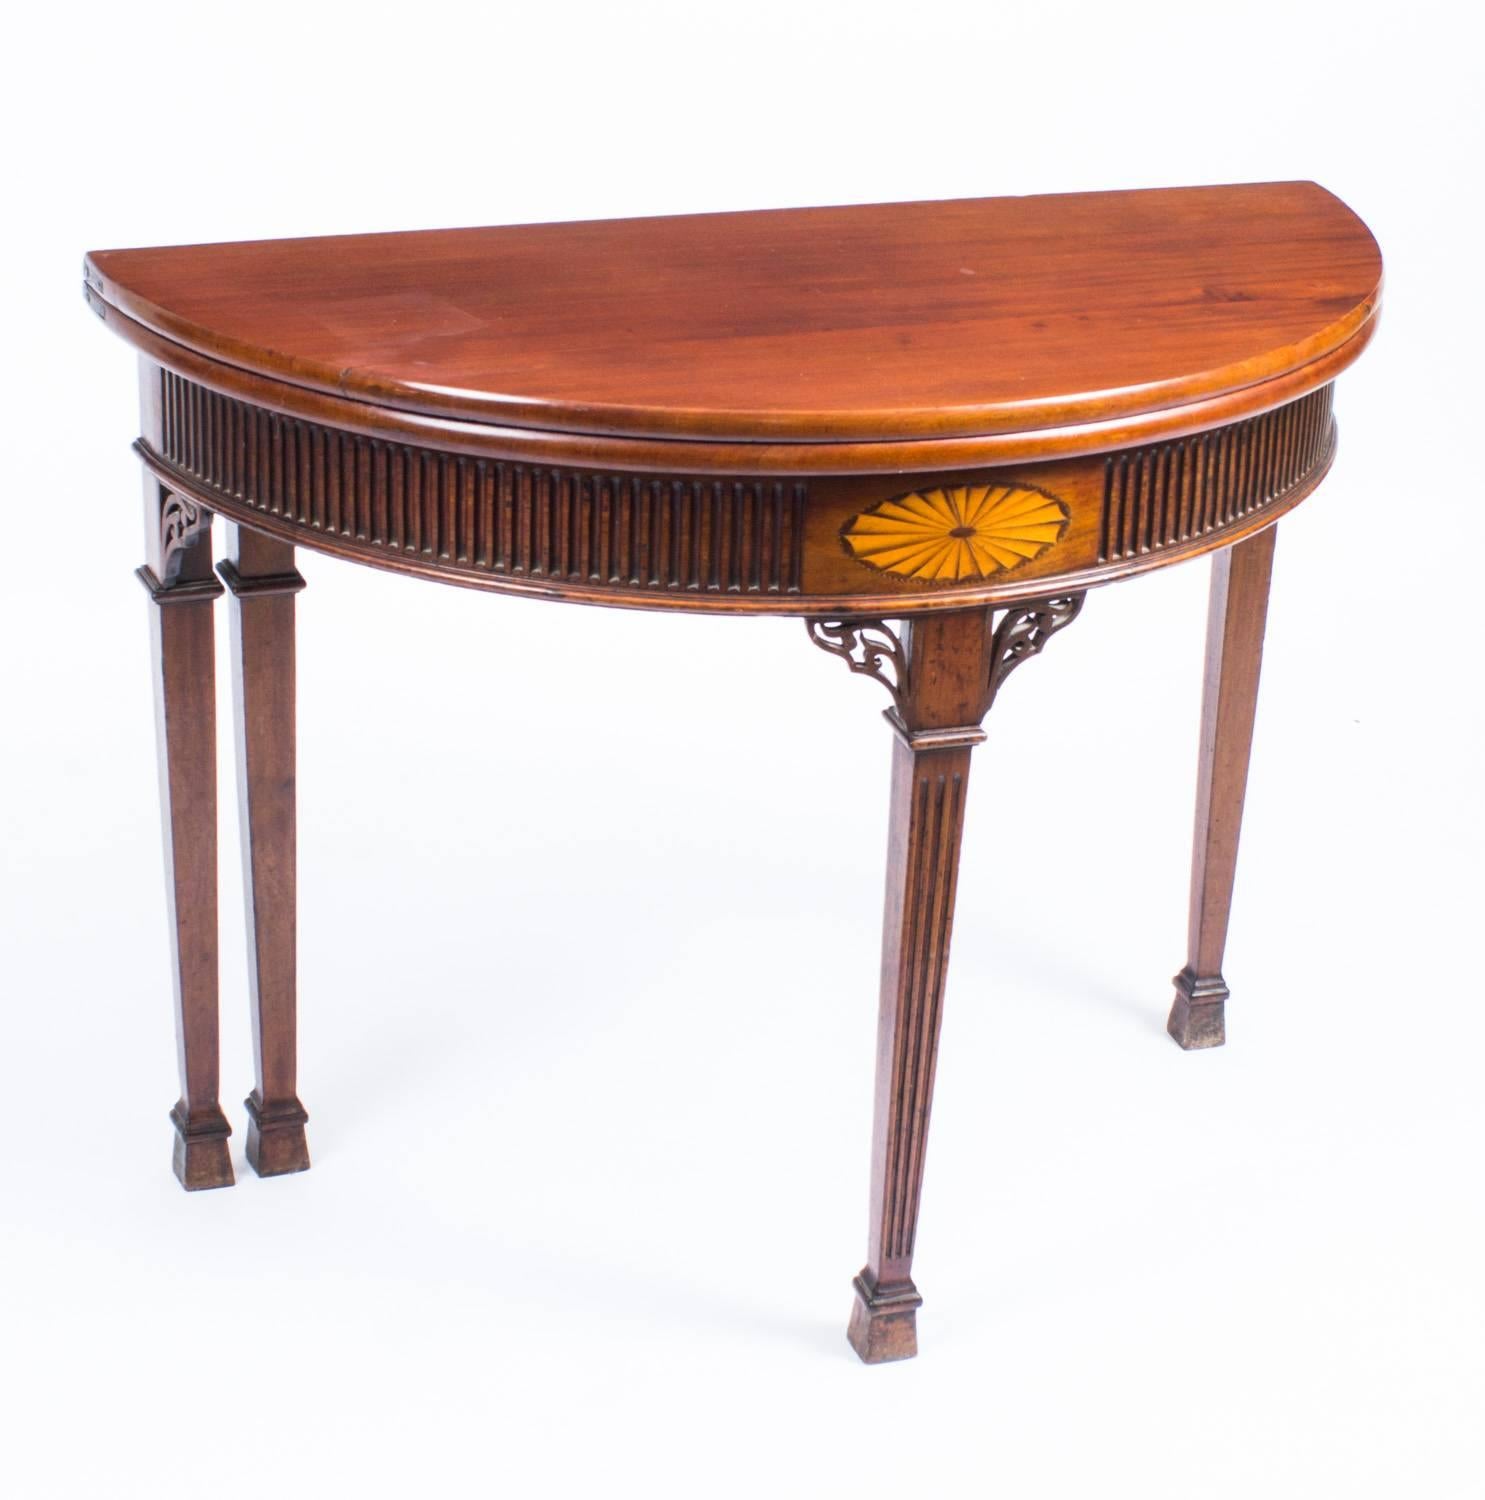 This is a beautiful antique Edwardian inlaid mahogany demilune card table, late 19th century in date.

The card table is of mahogany with a moulded top above a fluted frieze centred with a beautiful neoclassical inlaid satinwood shell and is